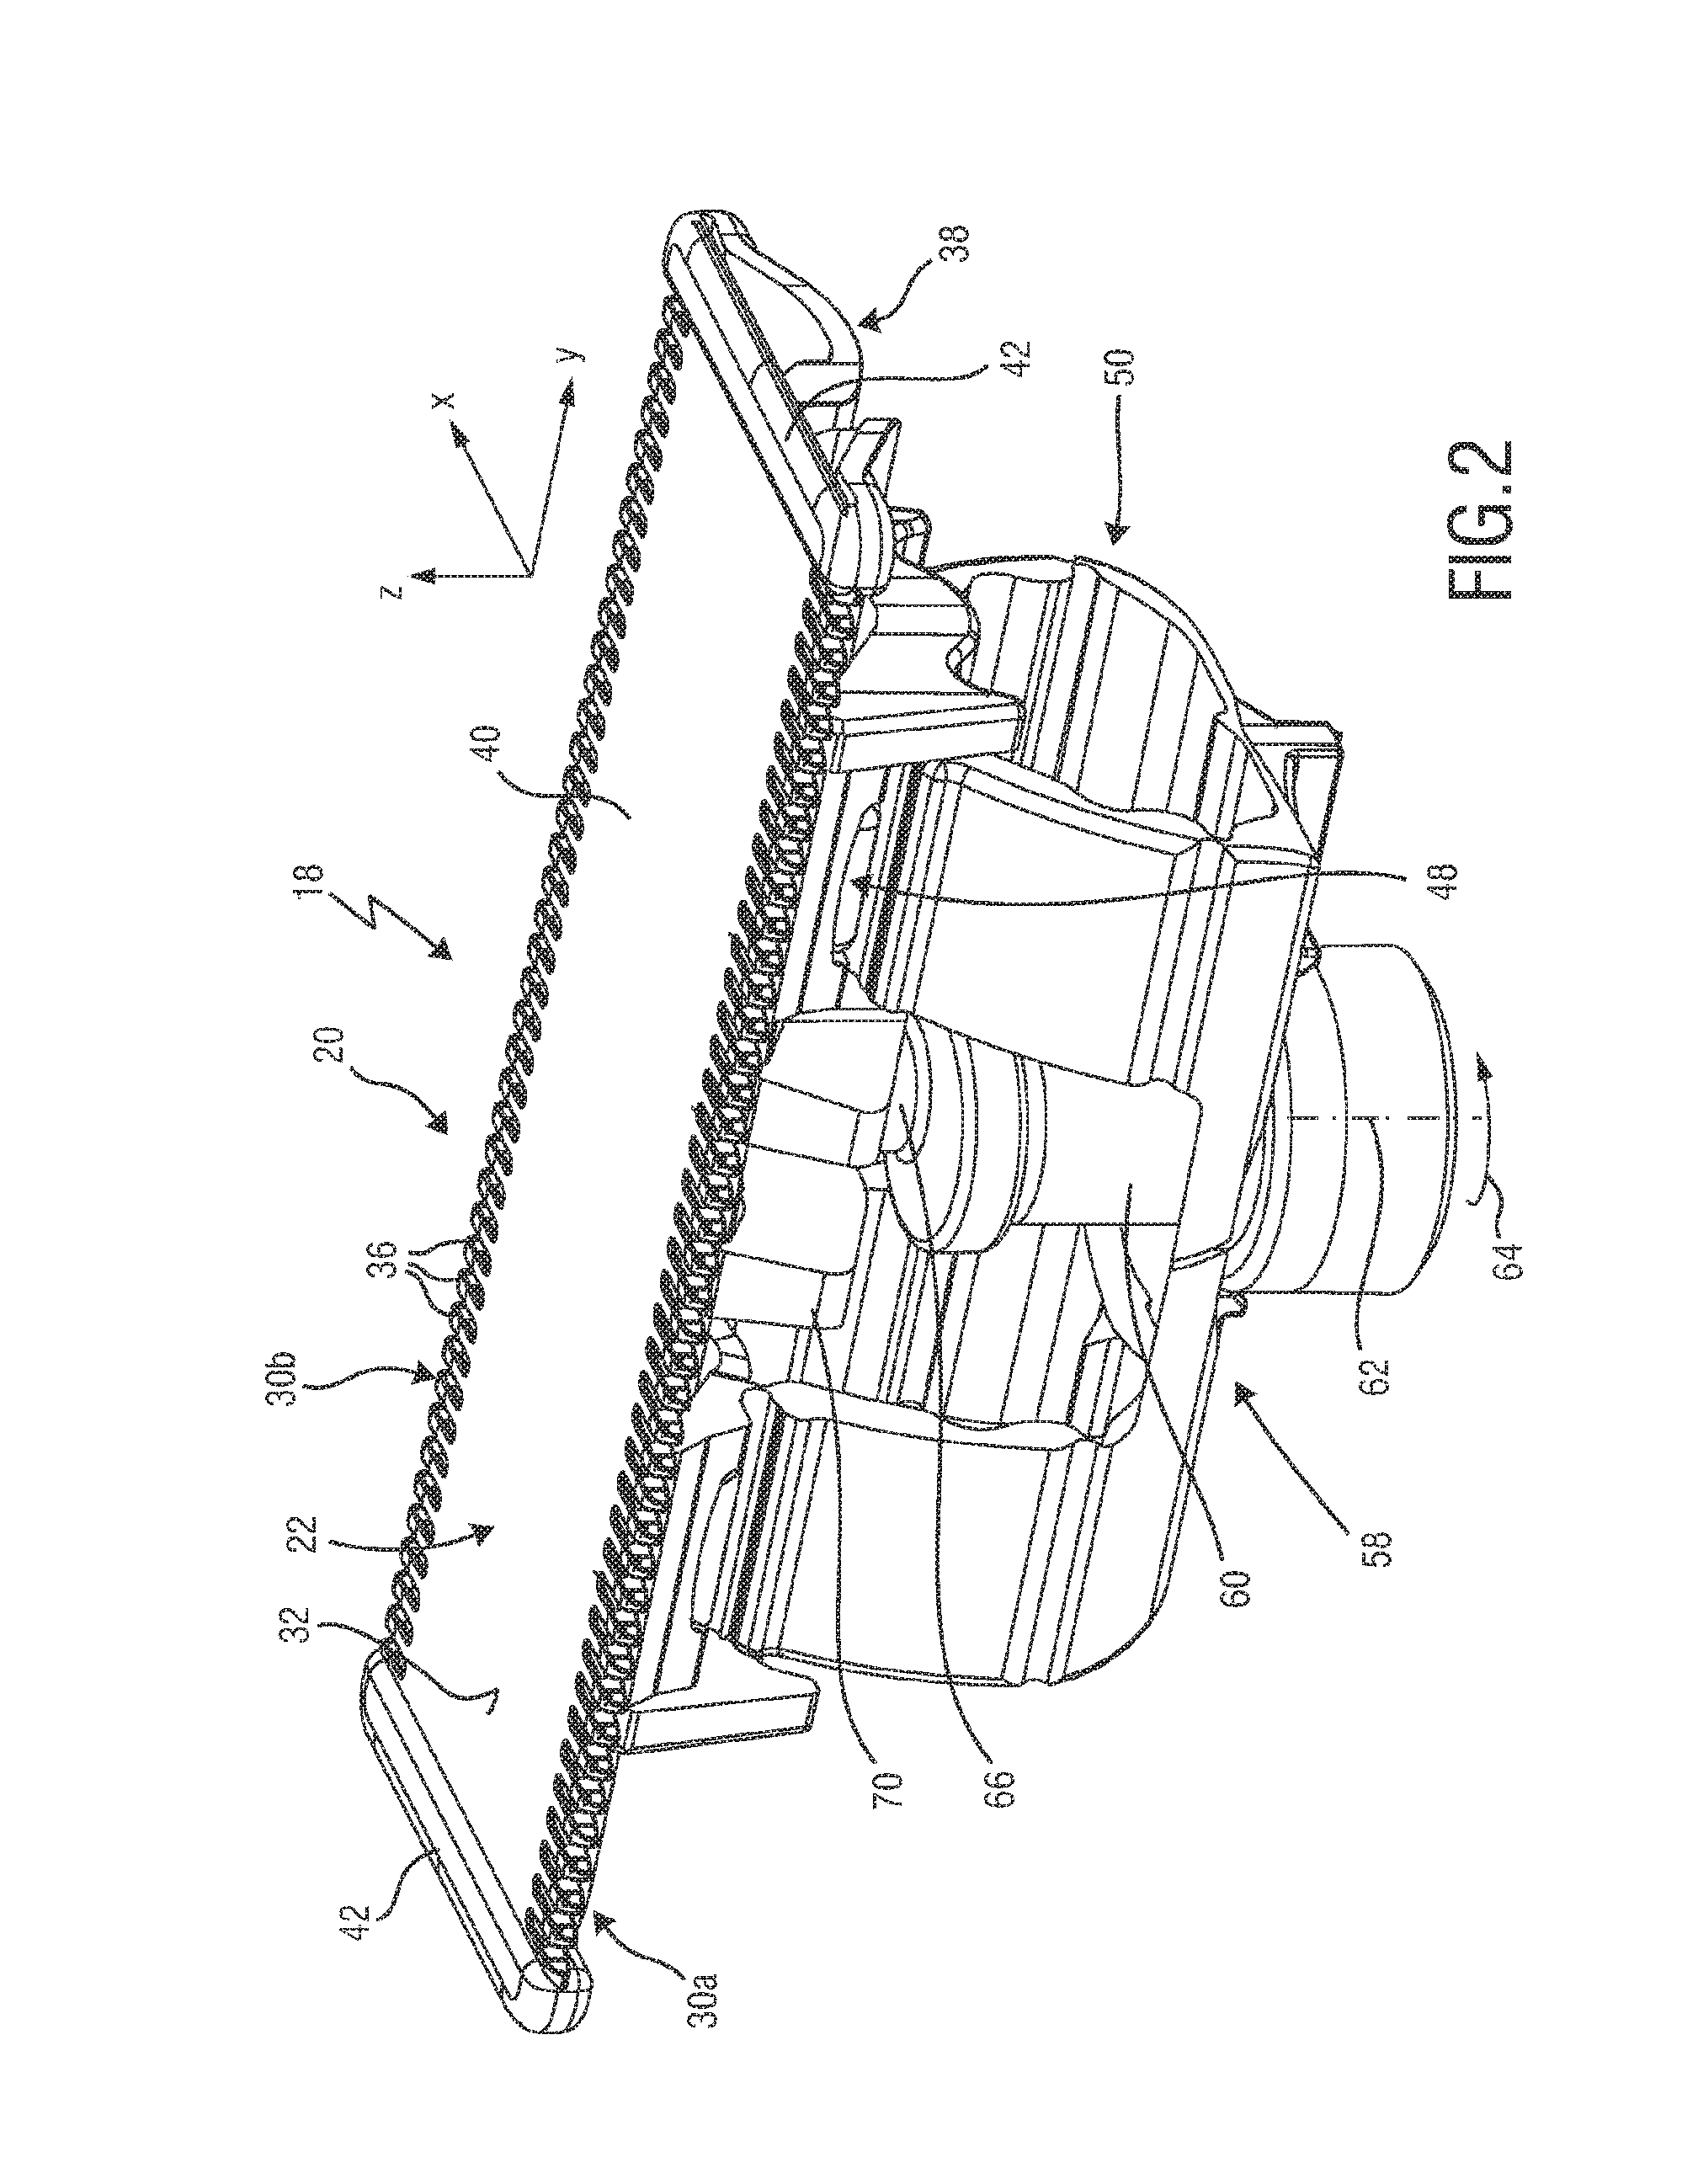 Blade set, hair cutting appliance,and related manufacturing method